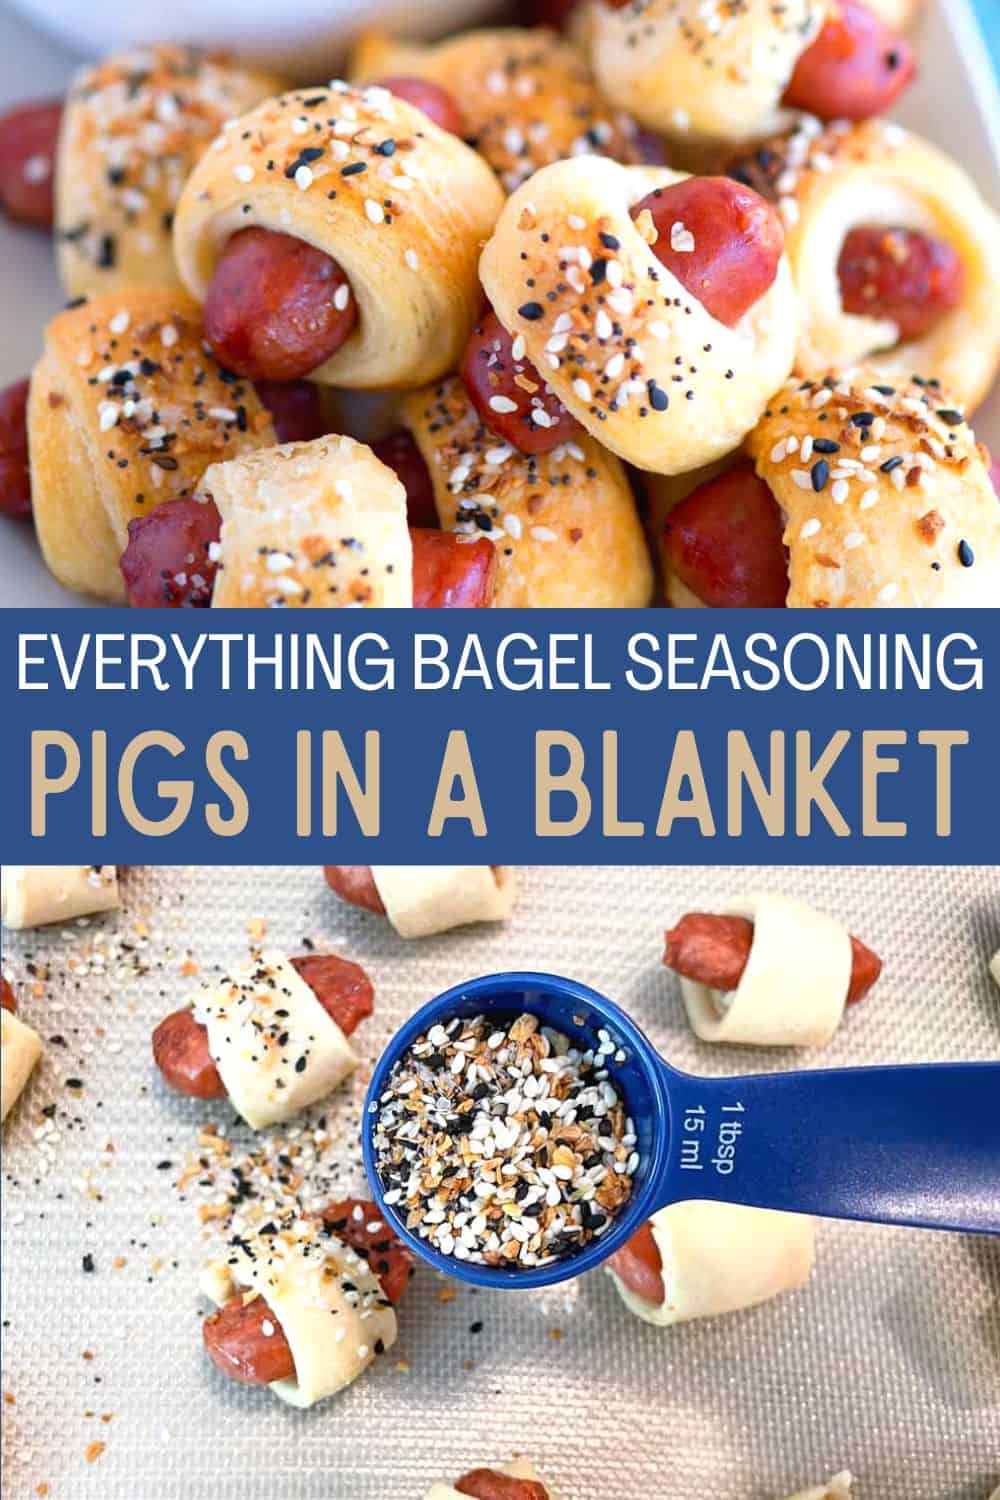 This "everything" pigs in a blanket recipe is a step up from the classic little smokies snack with a sprinkle of everything bagel seasoning.